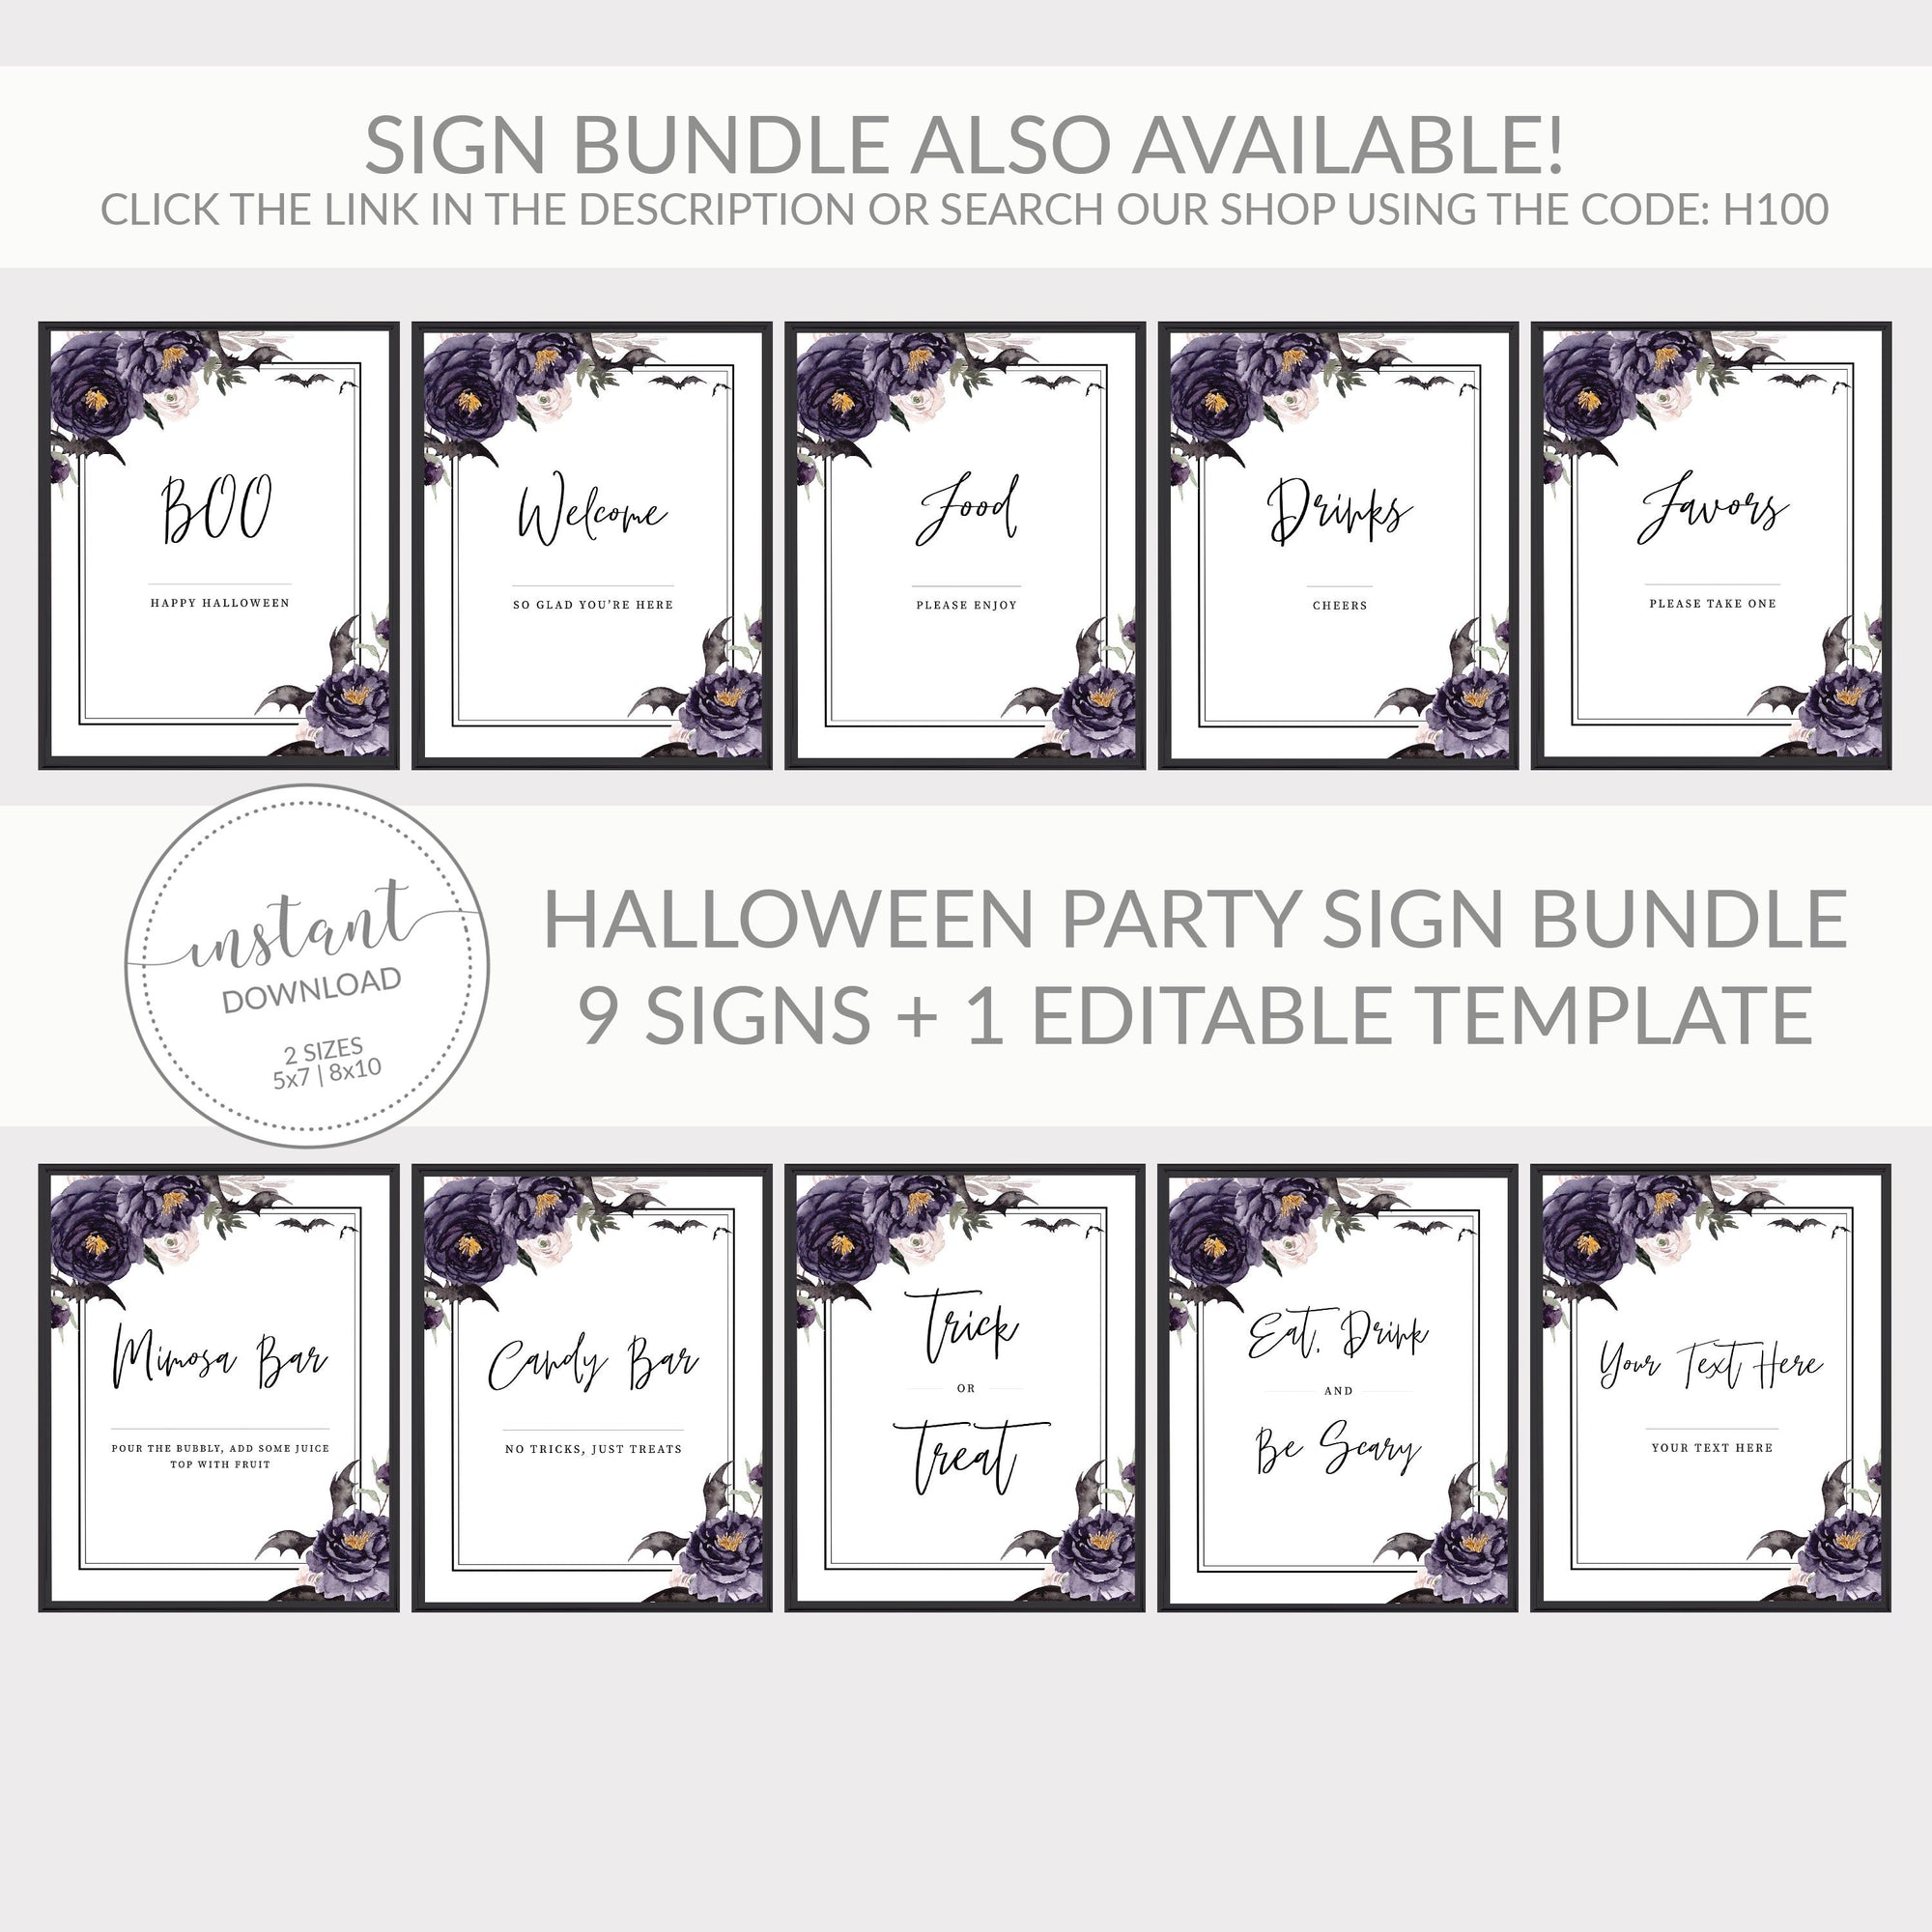 Halloween Candy Bar Sign, Halloween Printables, Halloween Party Decorations, Halloween Birthday Party Decor, INSTANT DOWNLOAD - H100